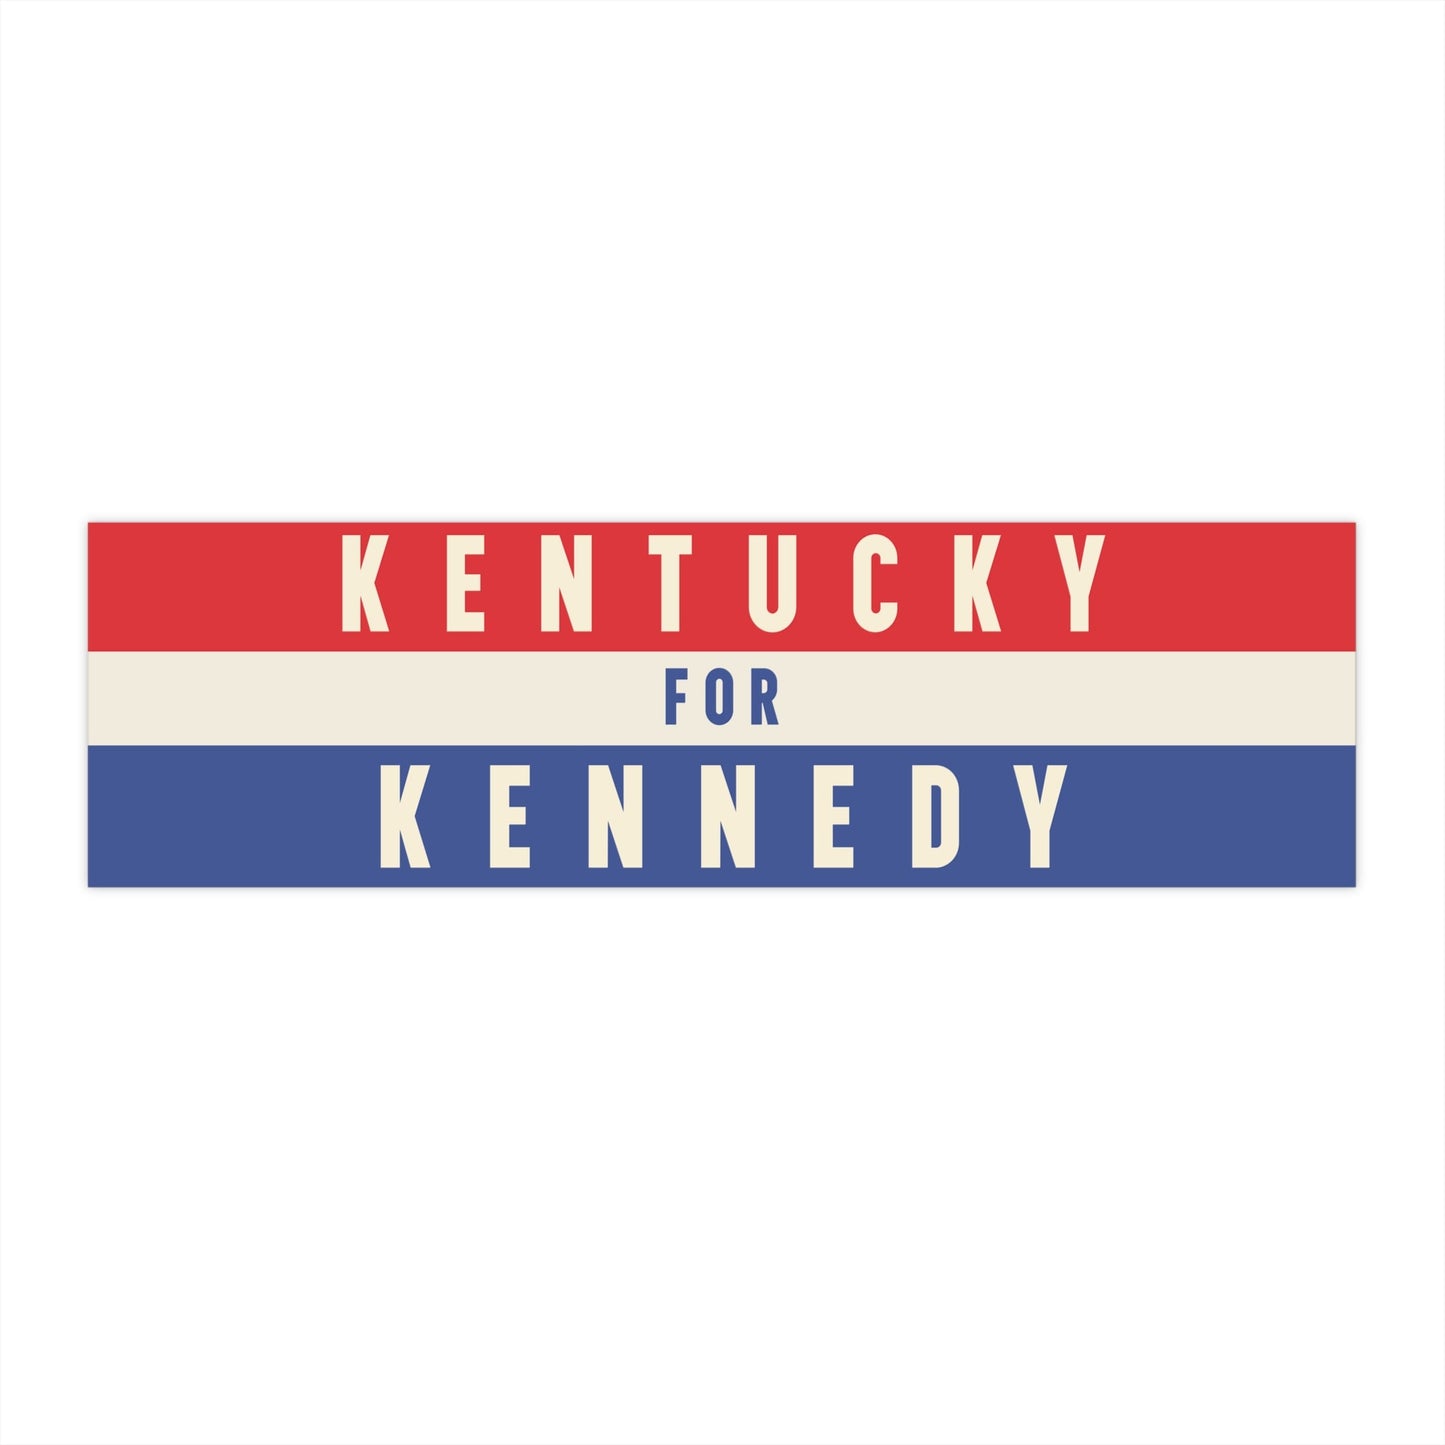 Kentucky for Kennedy Bumper Sticker - TEAM KENNEDY. All rights reserved